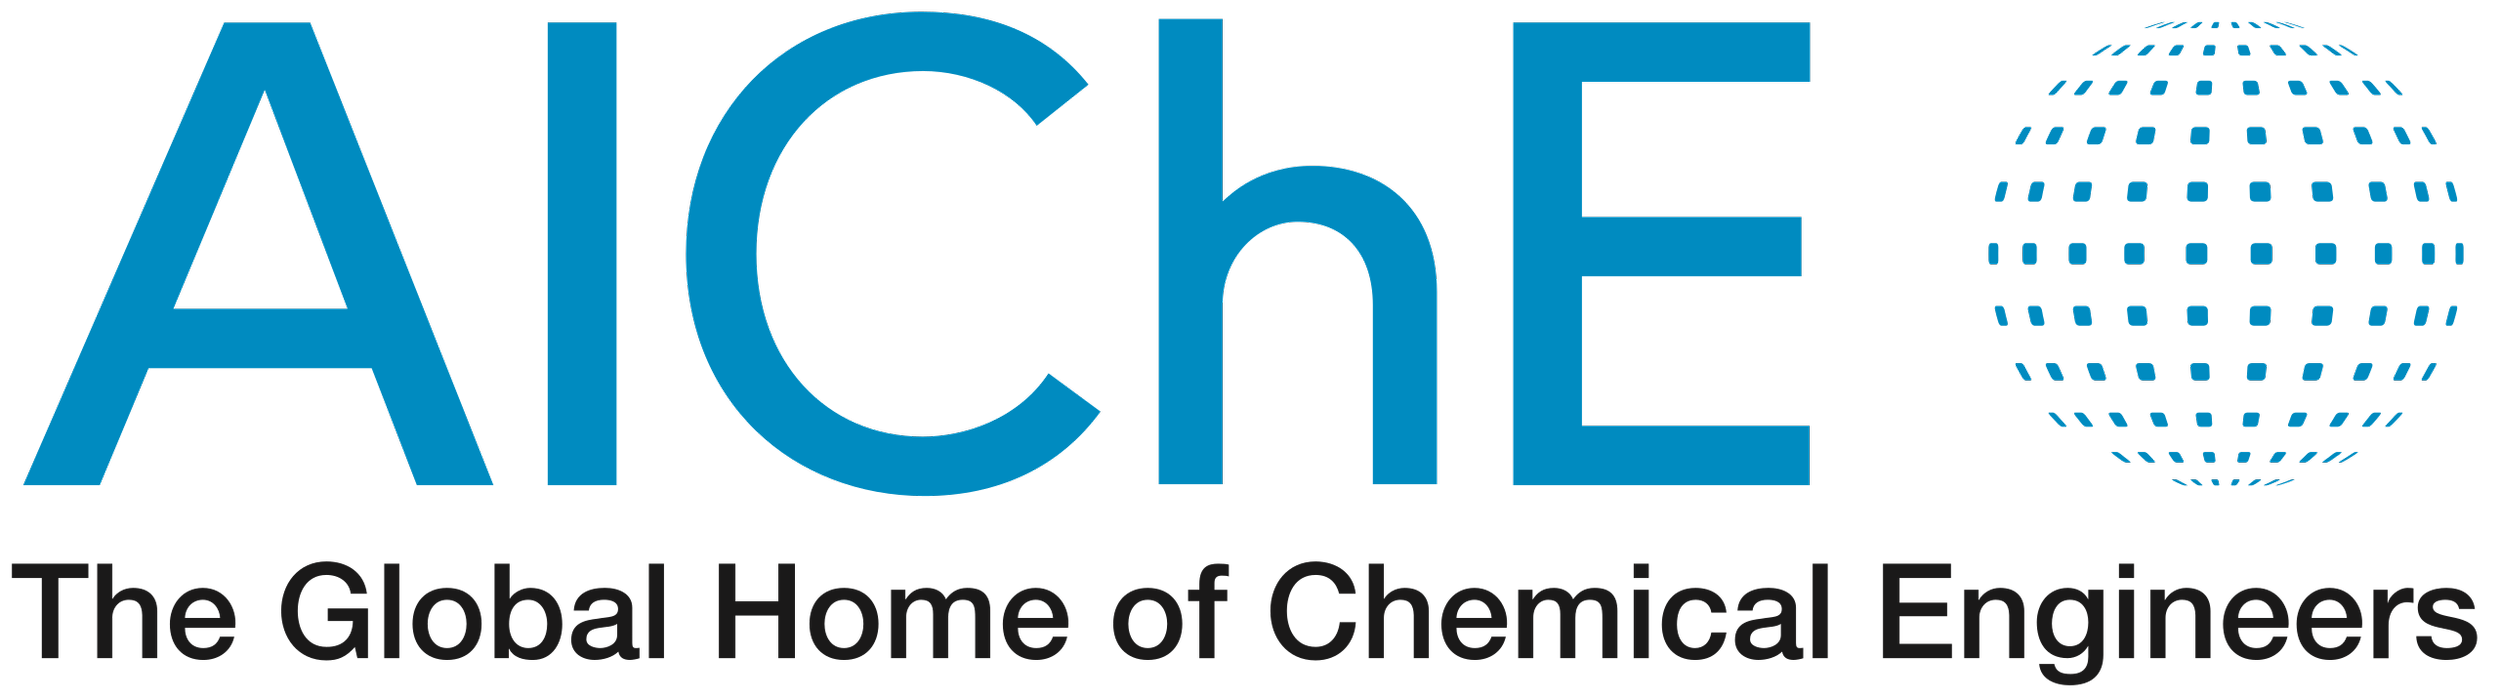 2560px-American_Institute_of_Chemical_Engineers_logo.png